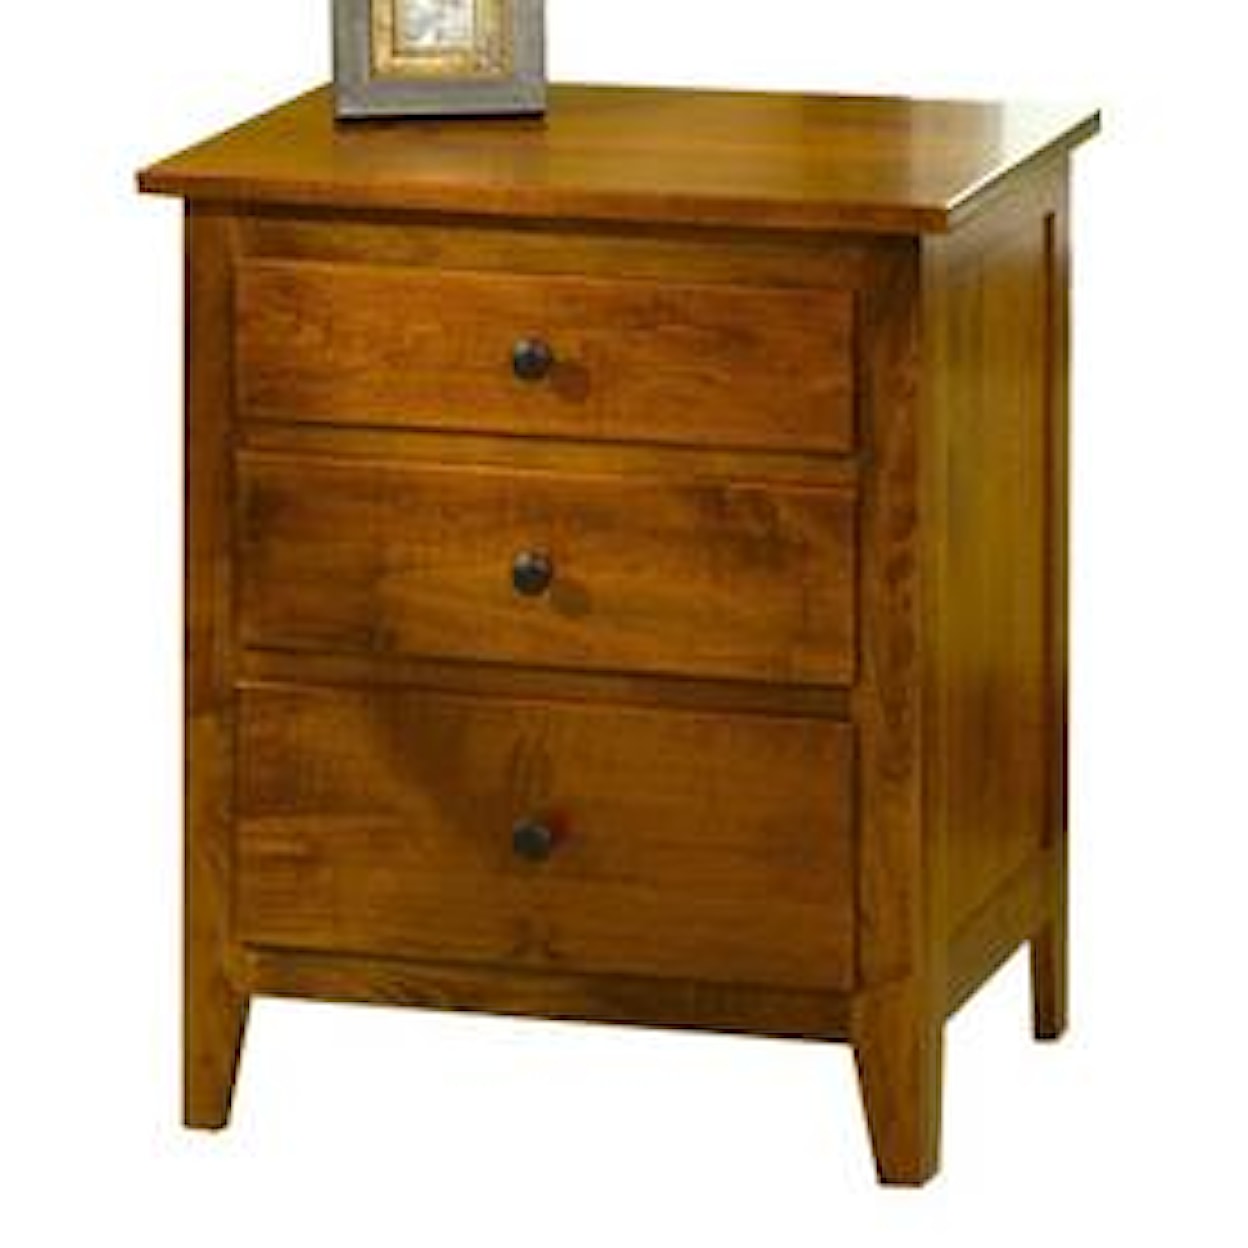 The Urban Collection Jamestown Square Large 3 Drawer Nightstand